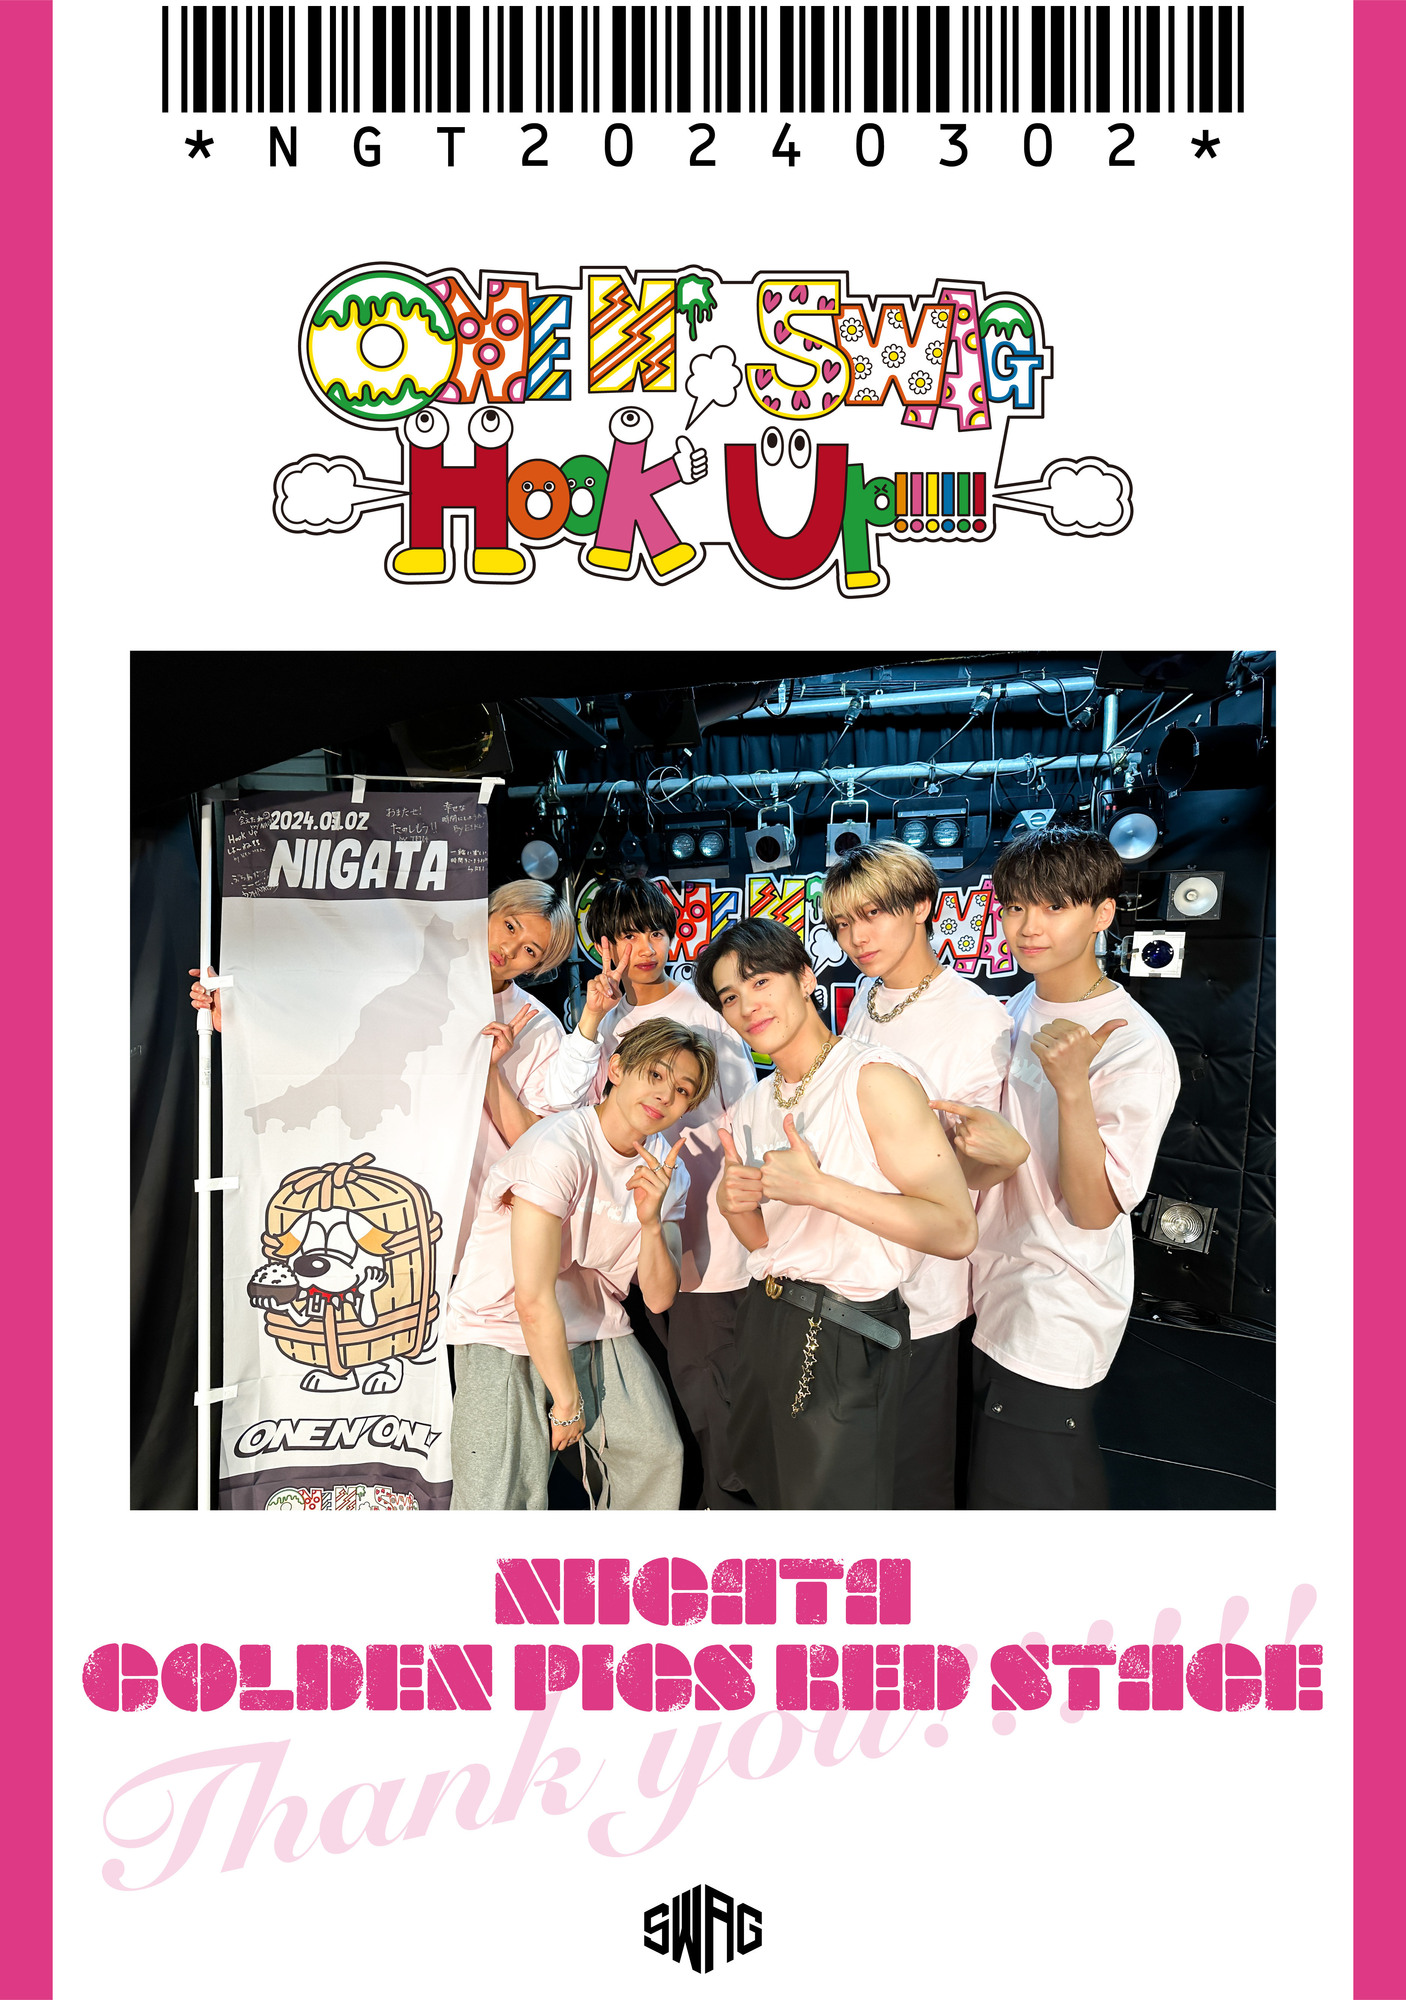 ONE N’ SWAG ～Hook Up!!!!!!～ ＠GOLDEN PIGS RED STAGE